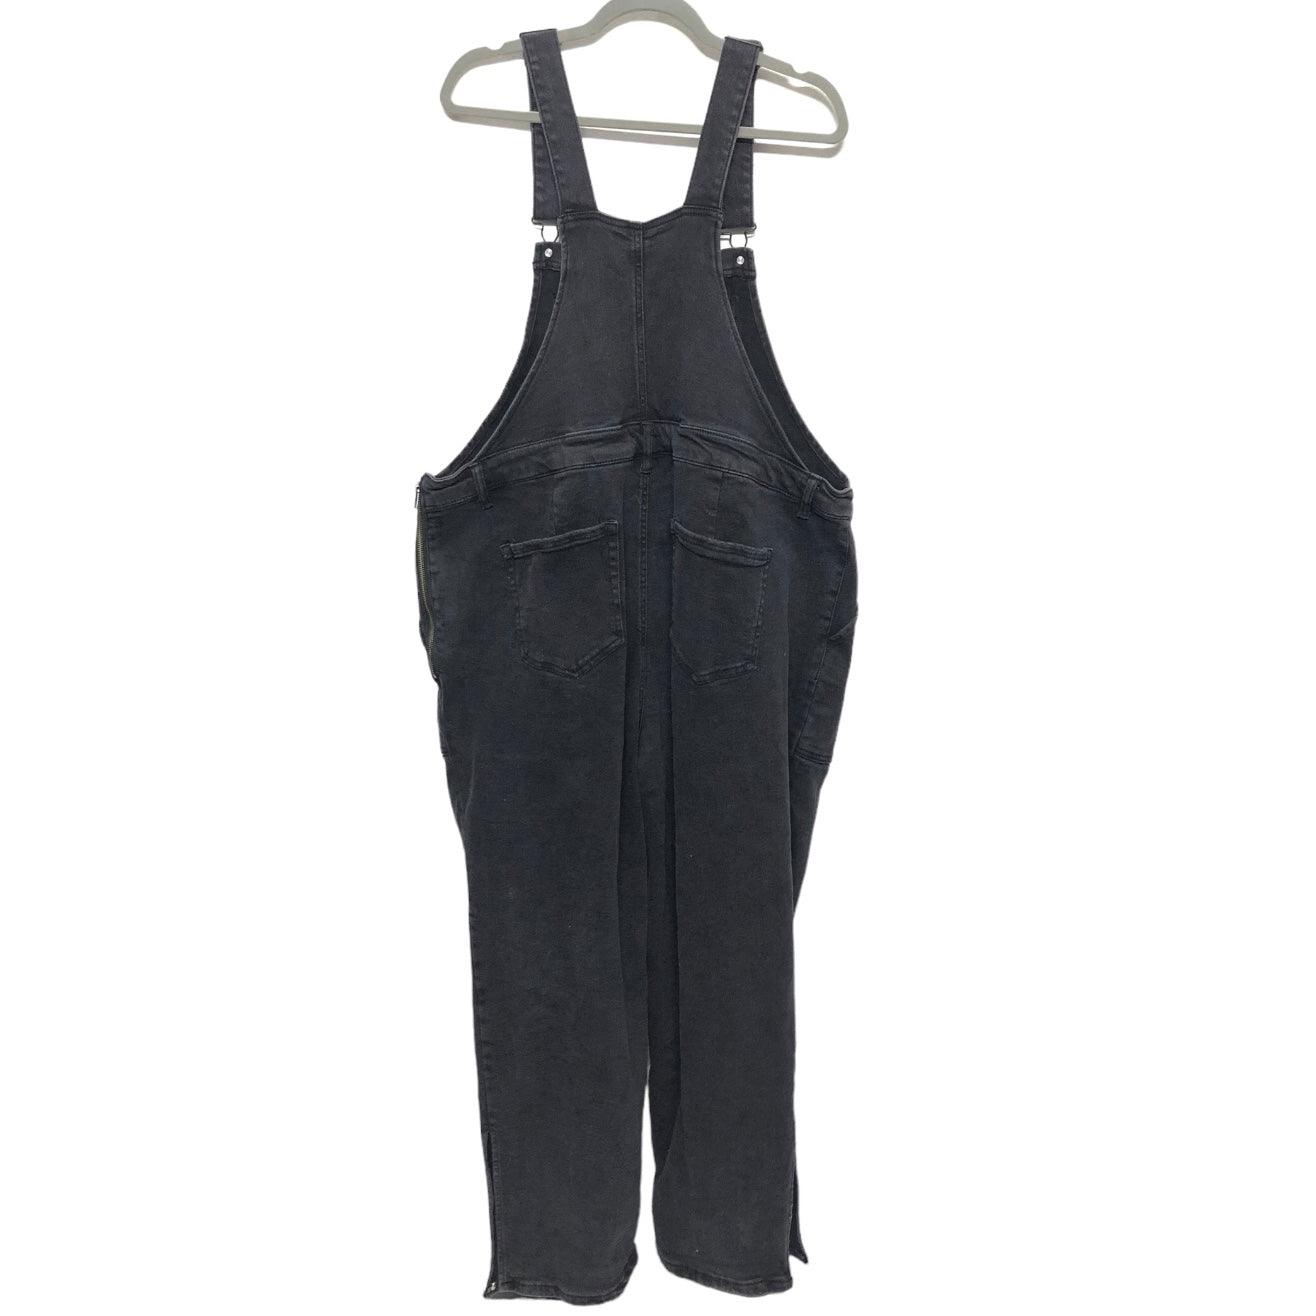 Overalls By Ava & Viv  Size: 18